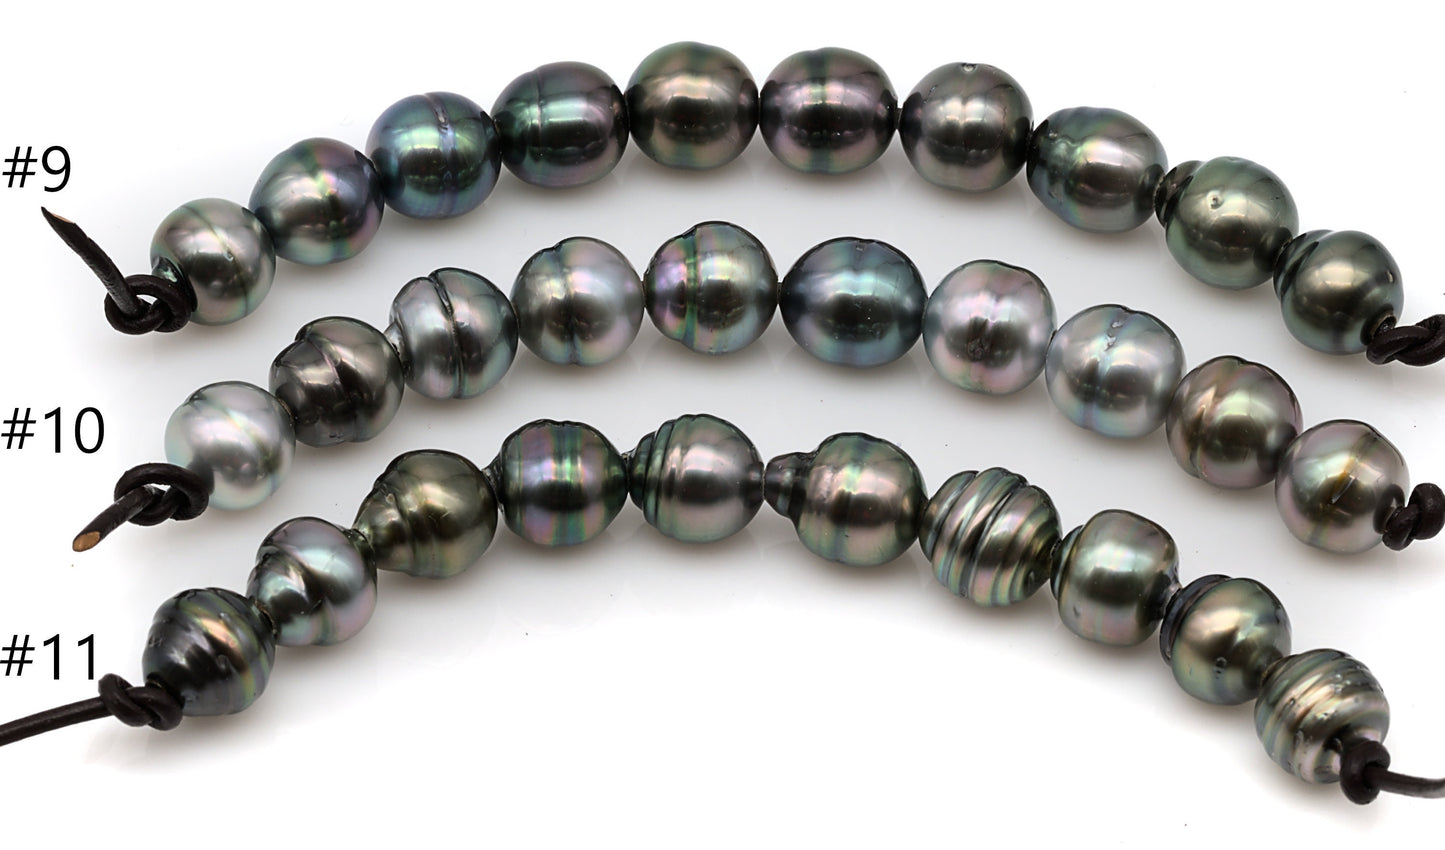 Tahitian Black Pearls Large Hole, Circle Tear Drop Pearl Beads with 2mm Hole in 9.5-10mm, High Luster, SKU# 1014TH